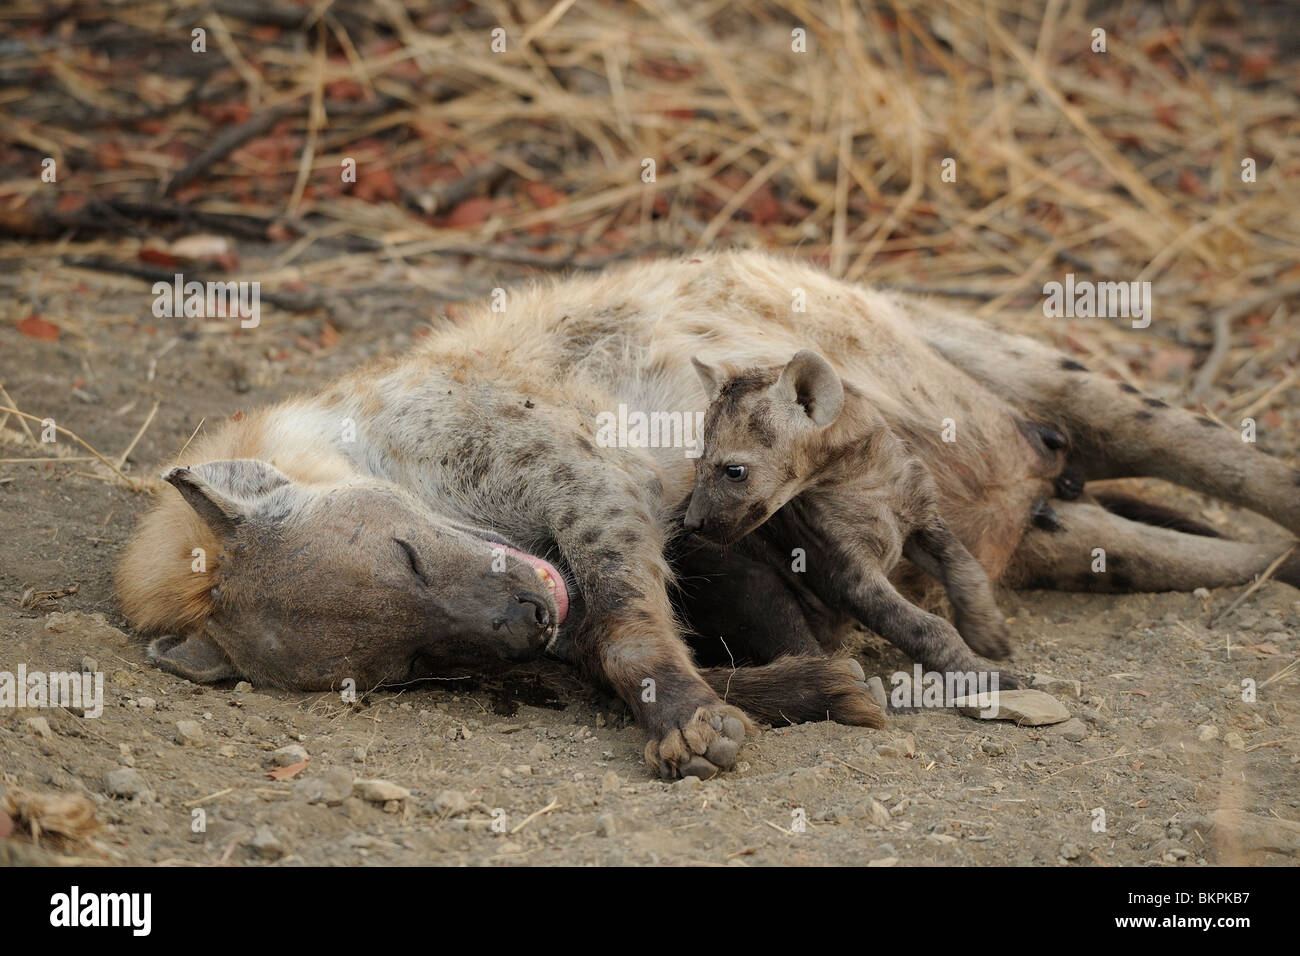 Gevlekte hyena moeder met jong liggend in zand, Spotted hyena mother with cub laying in sand Stock Photo